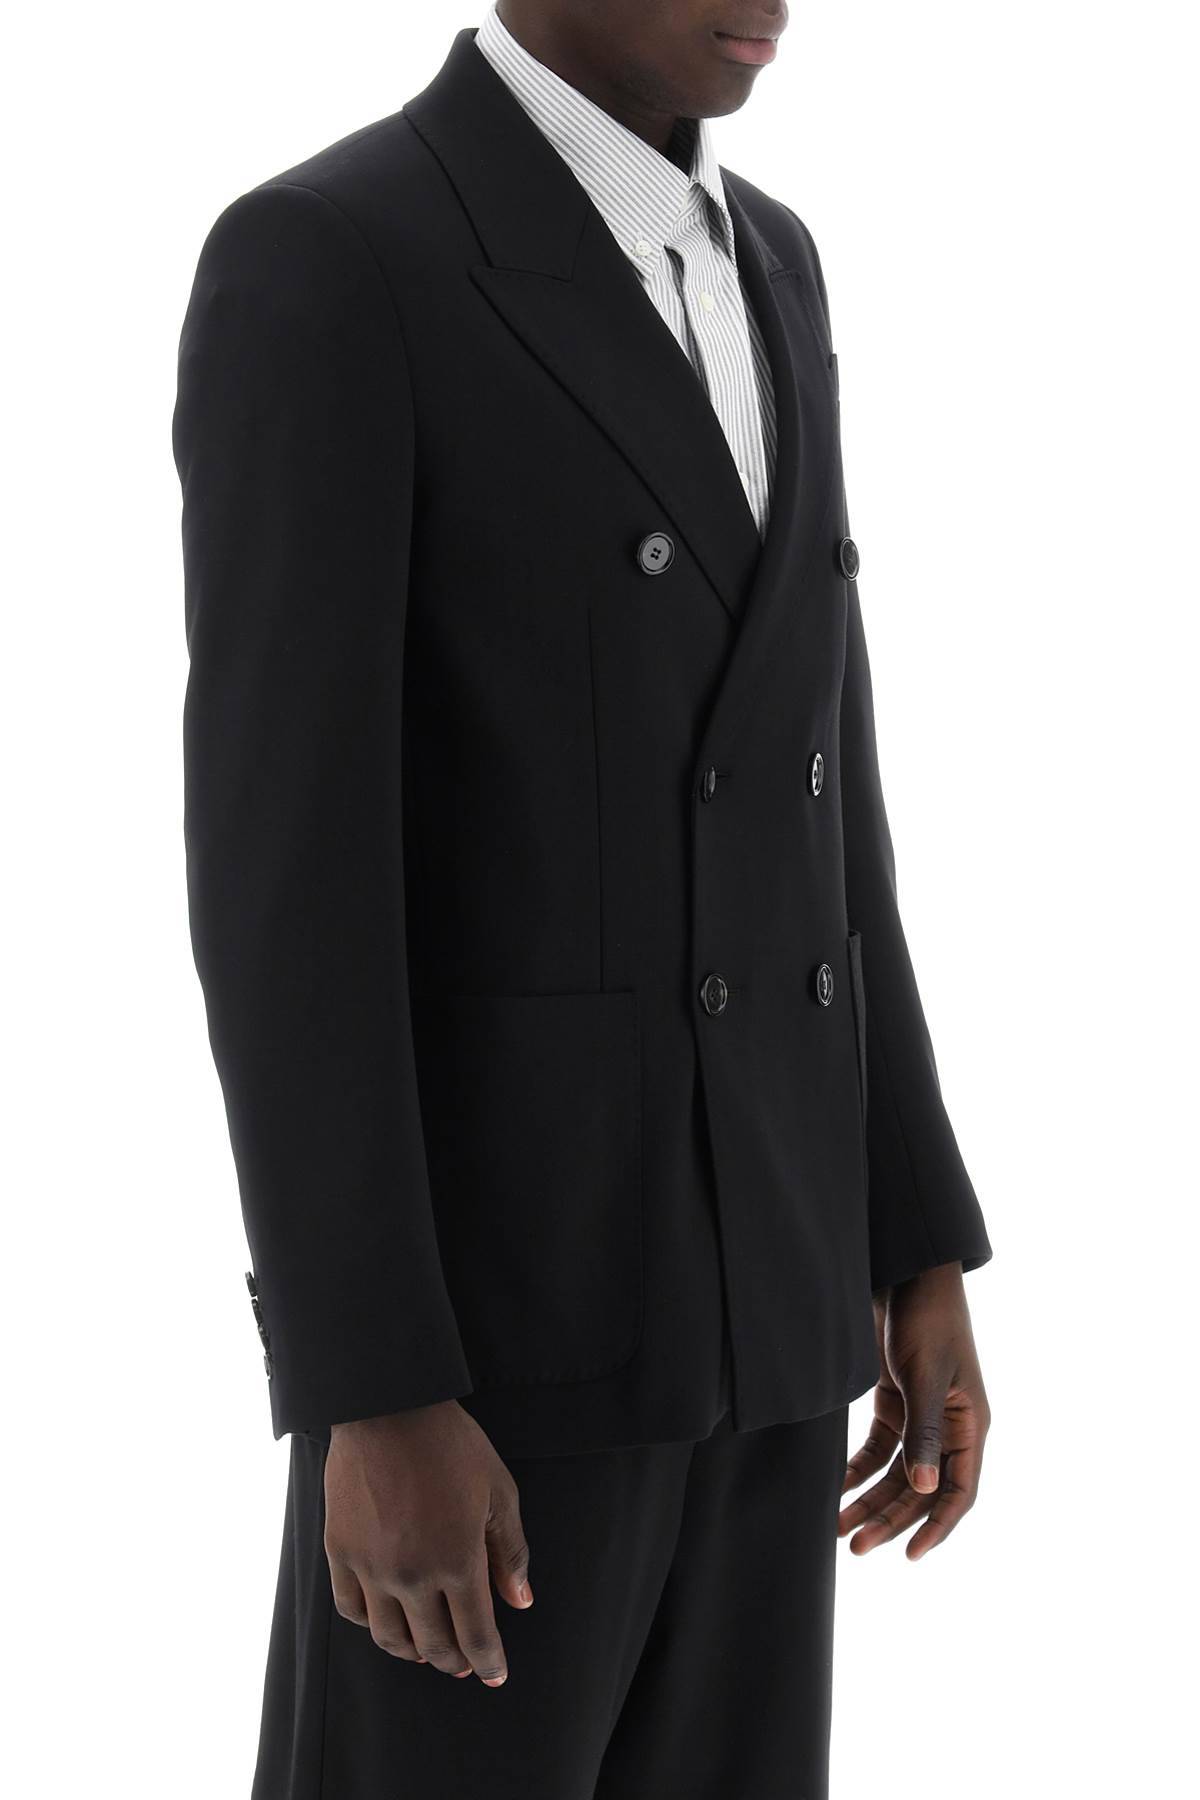 Shop Ami Alexandre Mattiussi Double-breasted Wool Jacket For Men In Black